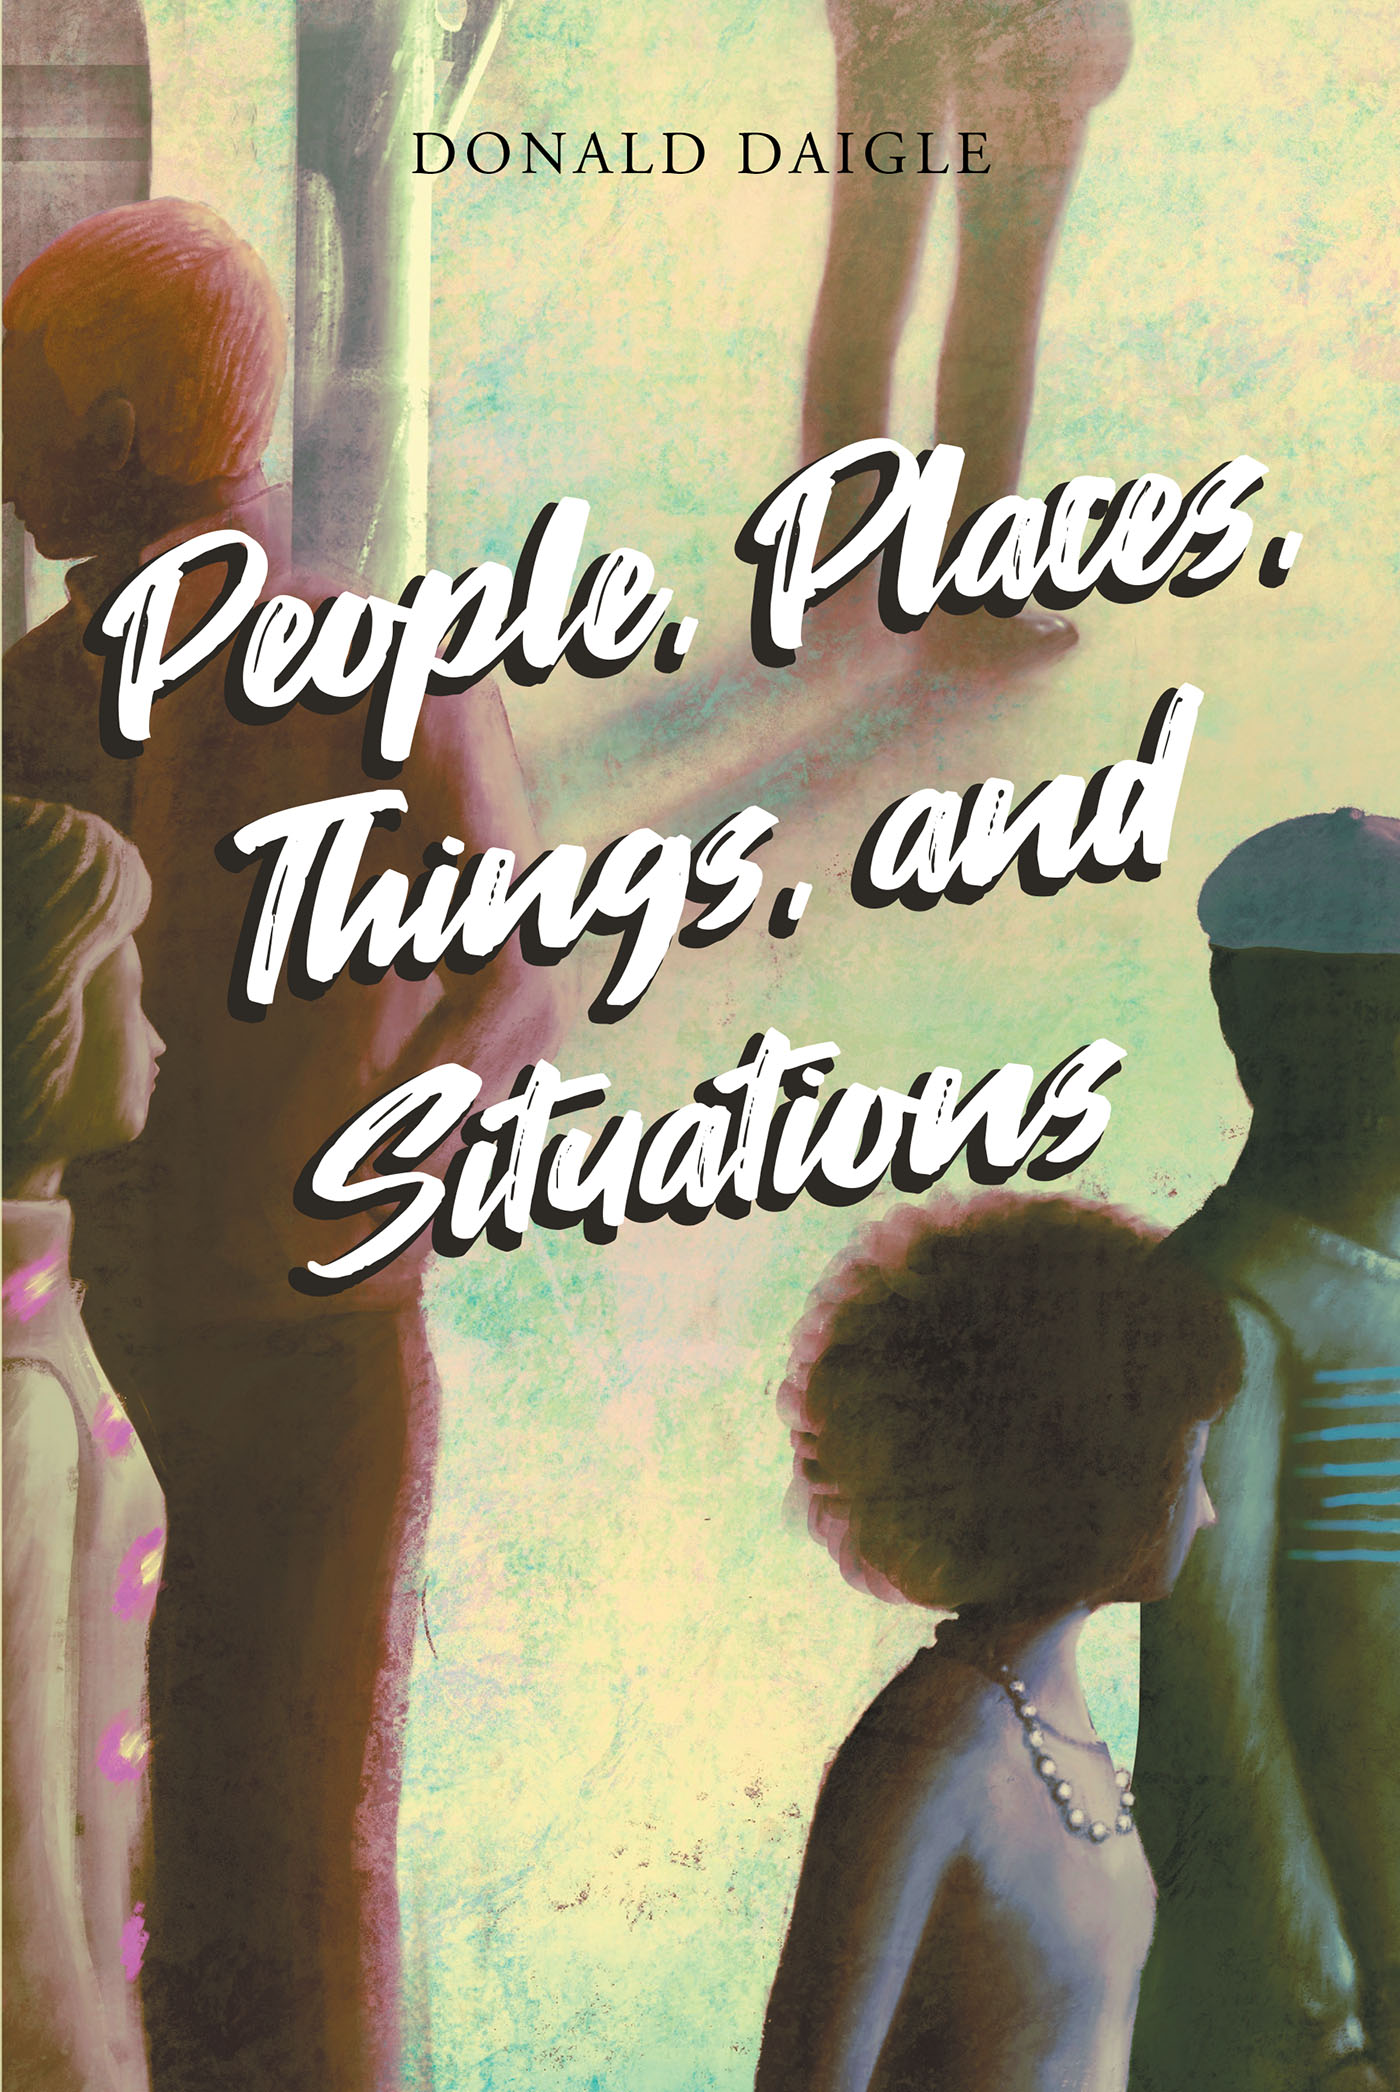 Author Donald Daigle’s New Book, "People, Places, Things, and Situations," is an Insightful Self-Help Book Inspired by the Author’s Personal Experiences